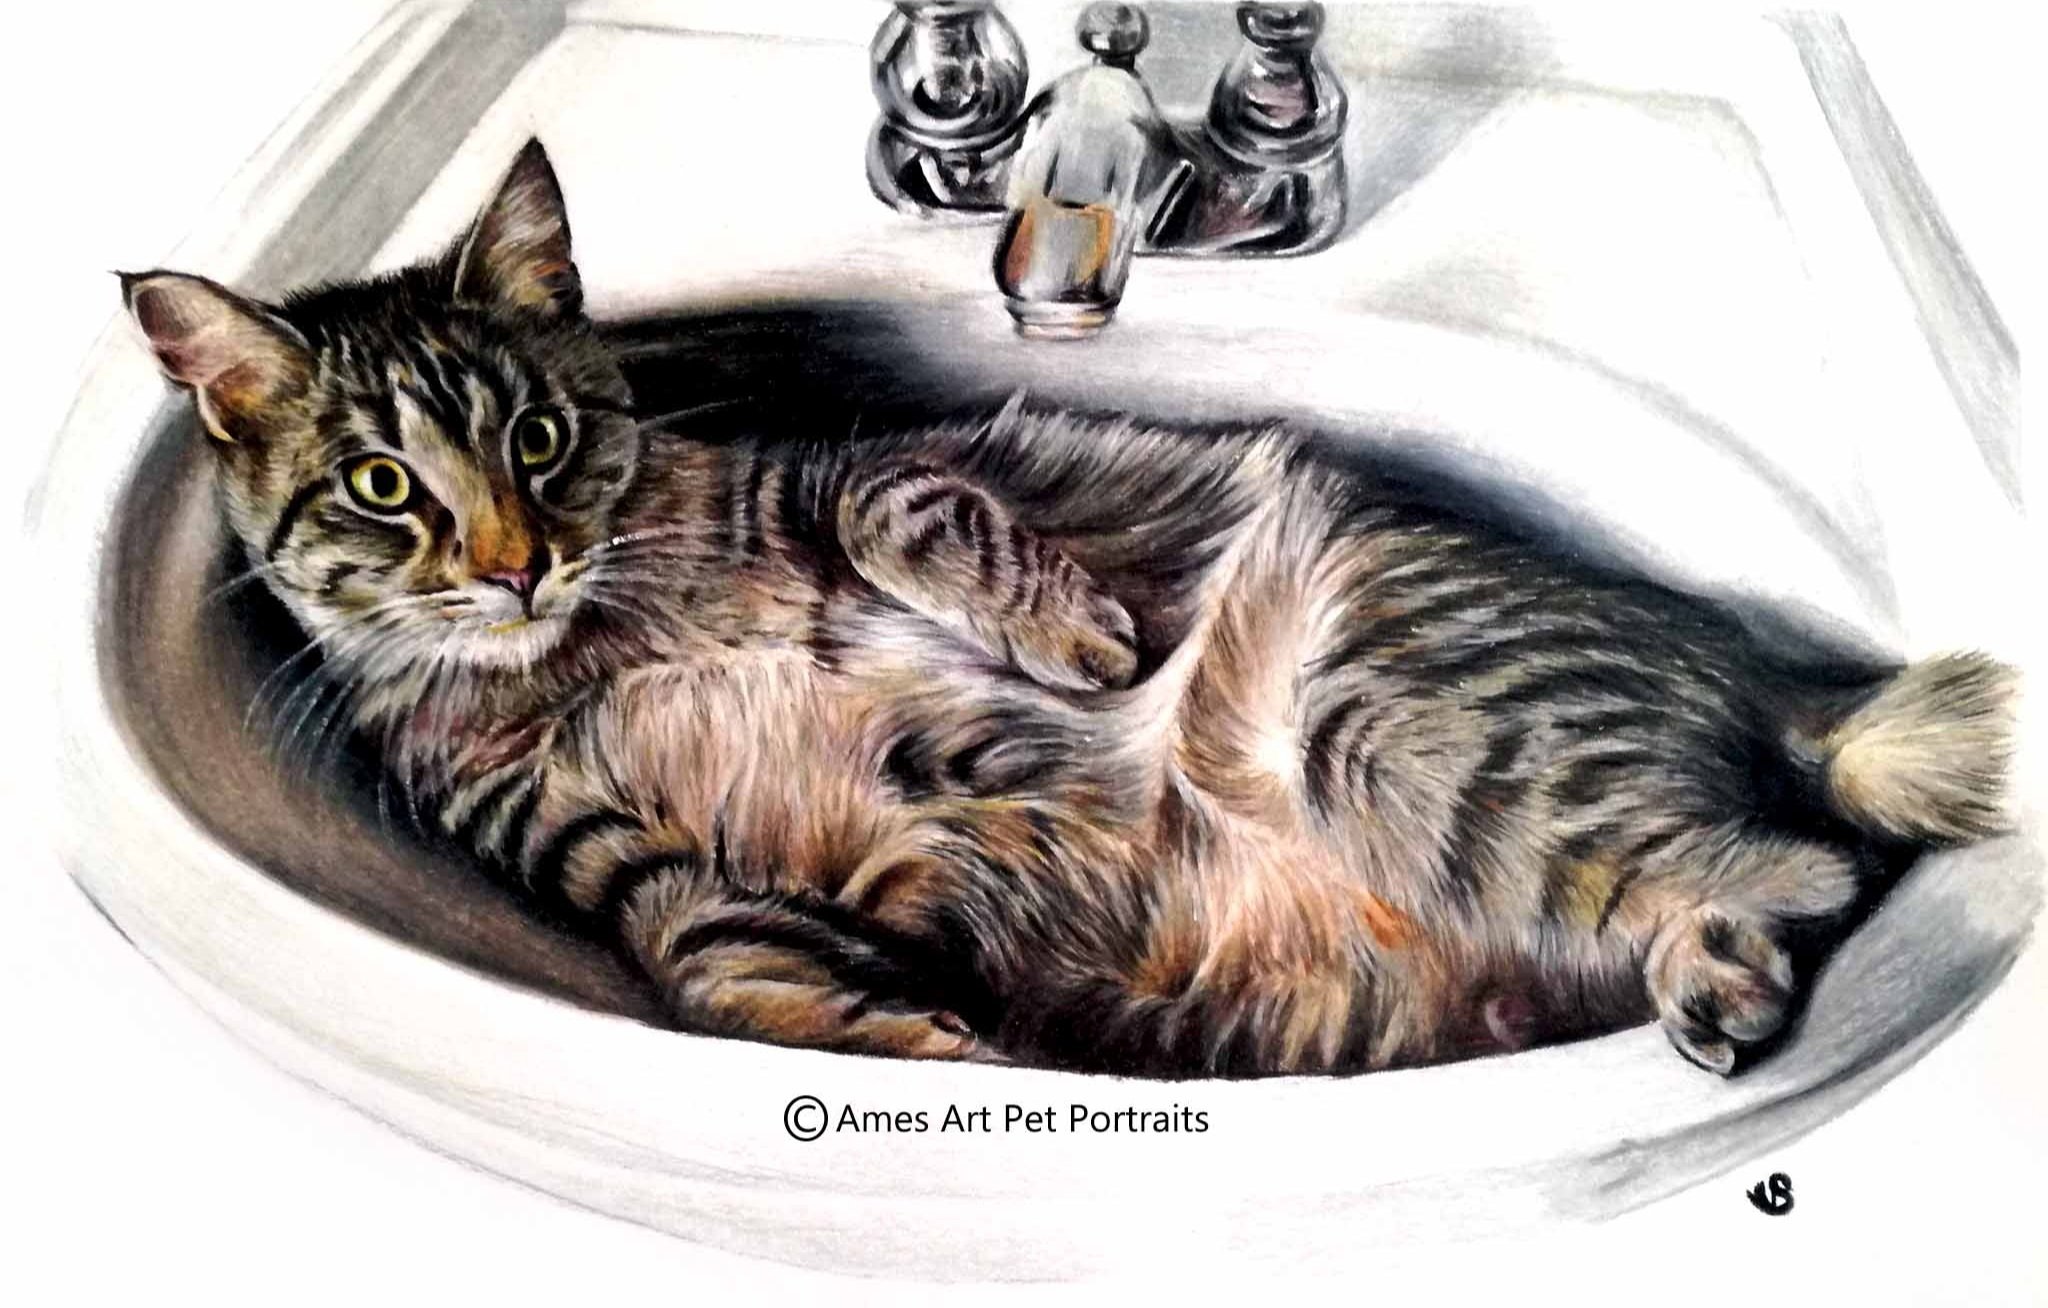 Drawing of Huxley Bean Fin the tabby cat in a sink from Minnesota, USA (Copy)